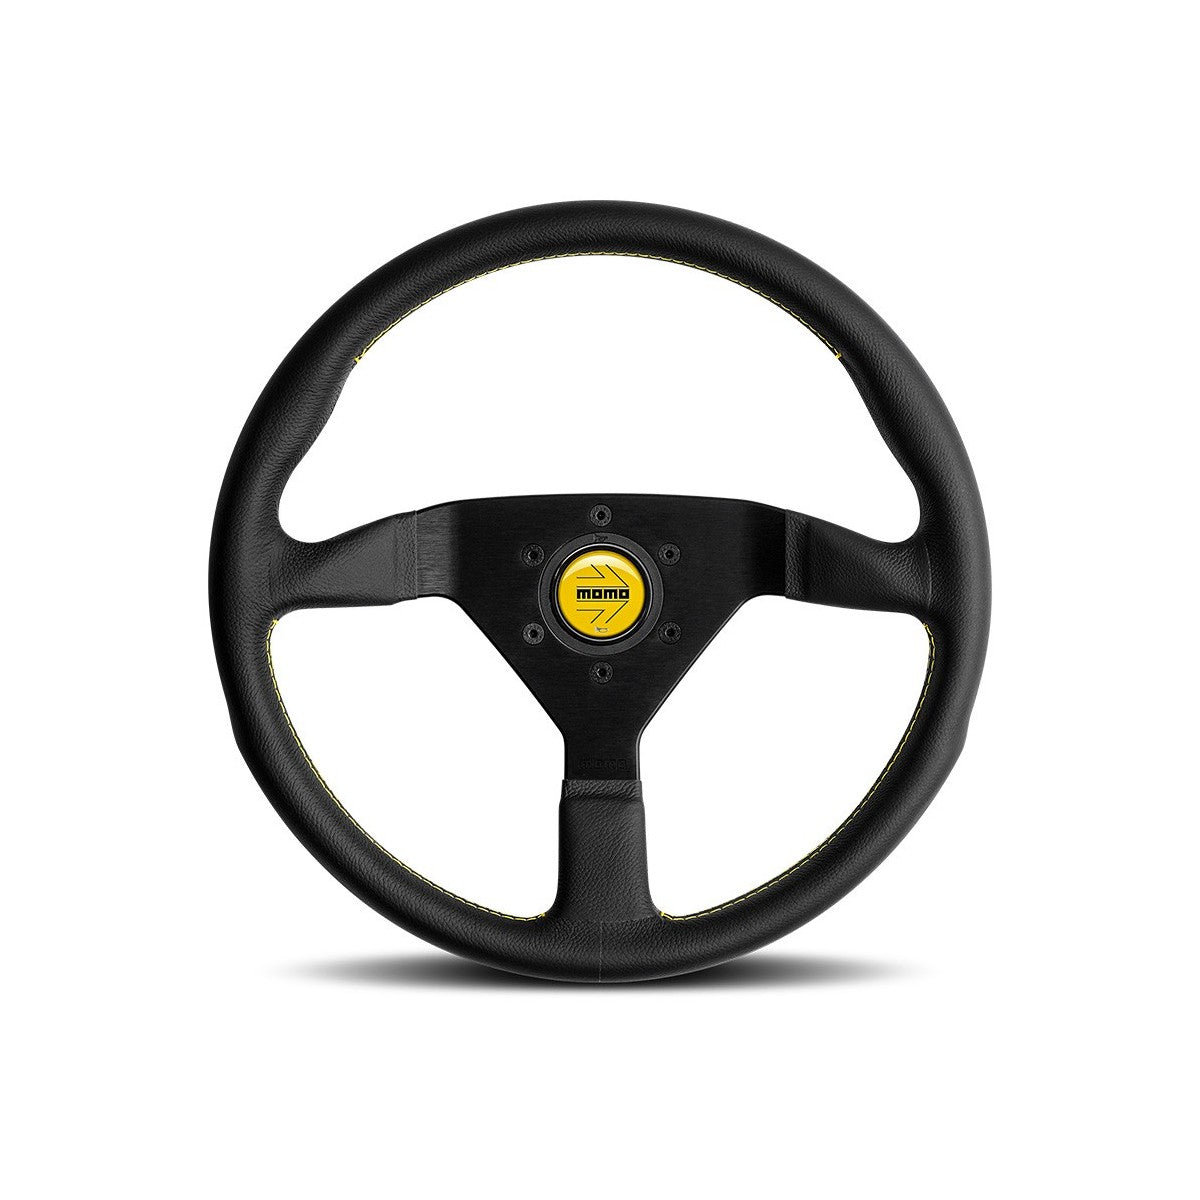 MOMO Montecarlo Steering Wheel 350 mm - Black Leather/Yellow Stitch/Black Anodized Spokes - Dirty Racing Products